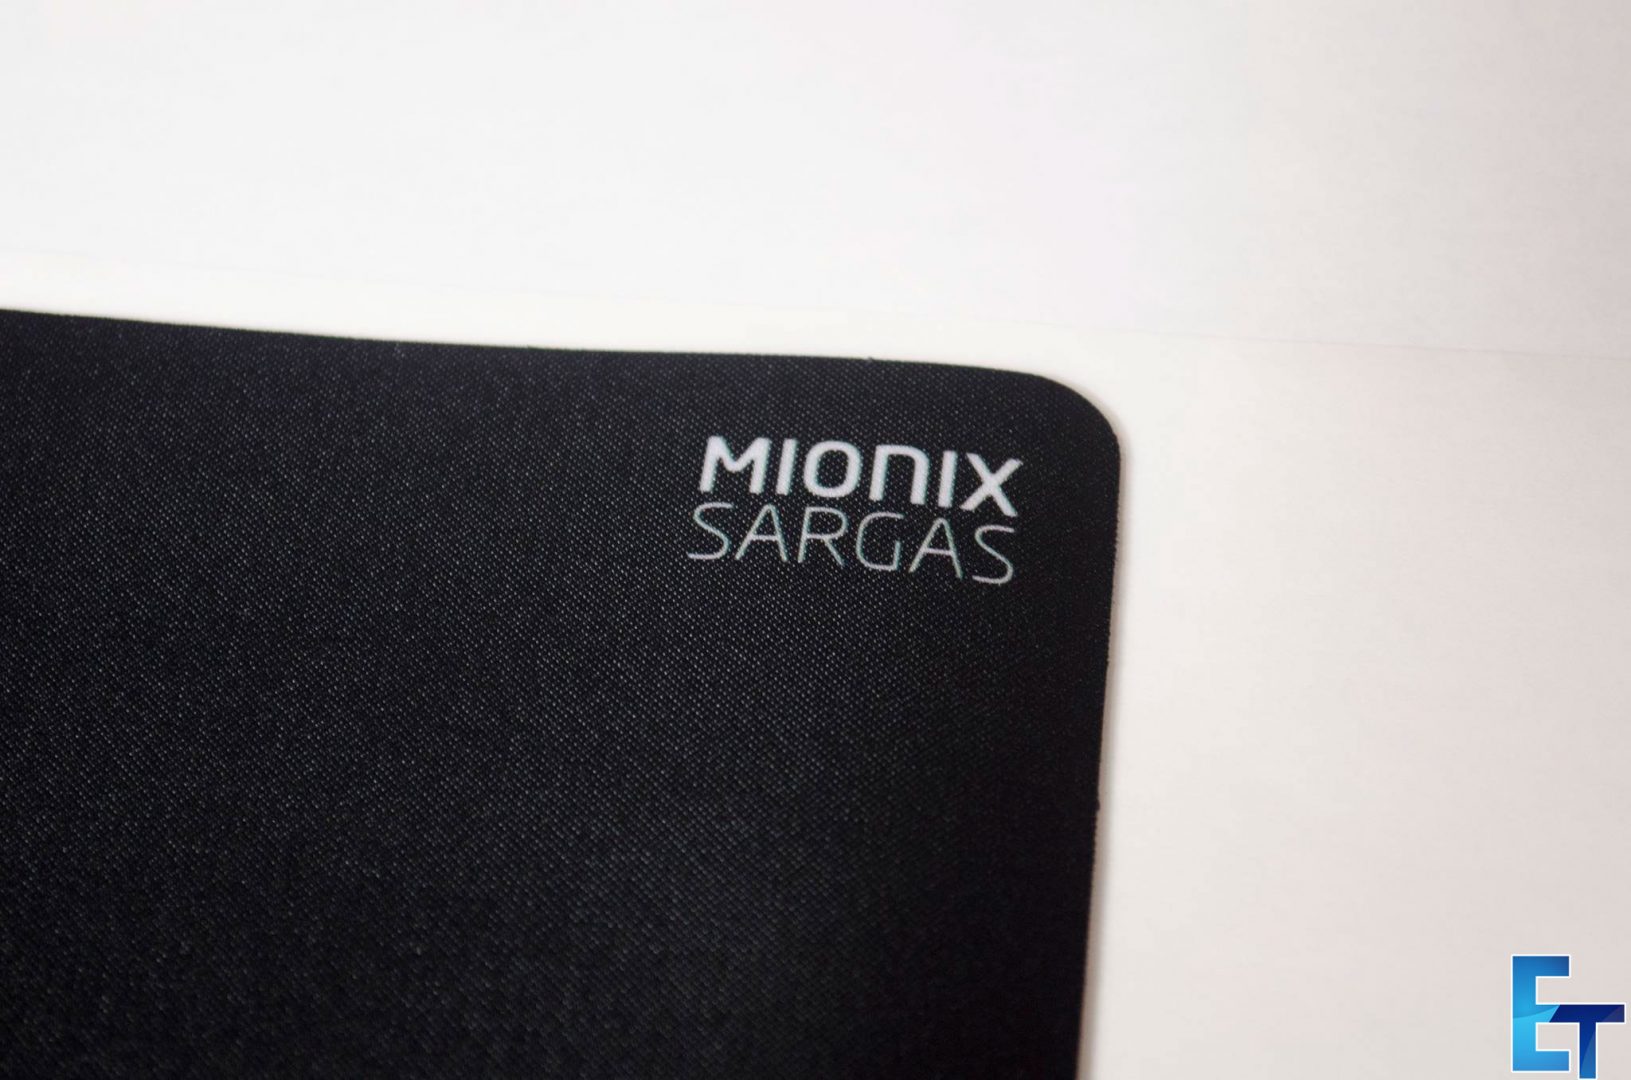 MIONIX-SARGAS-XLSoft-Gaming-Mouse-Pad_2